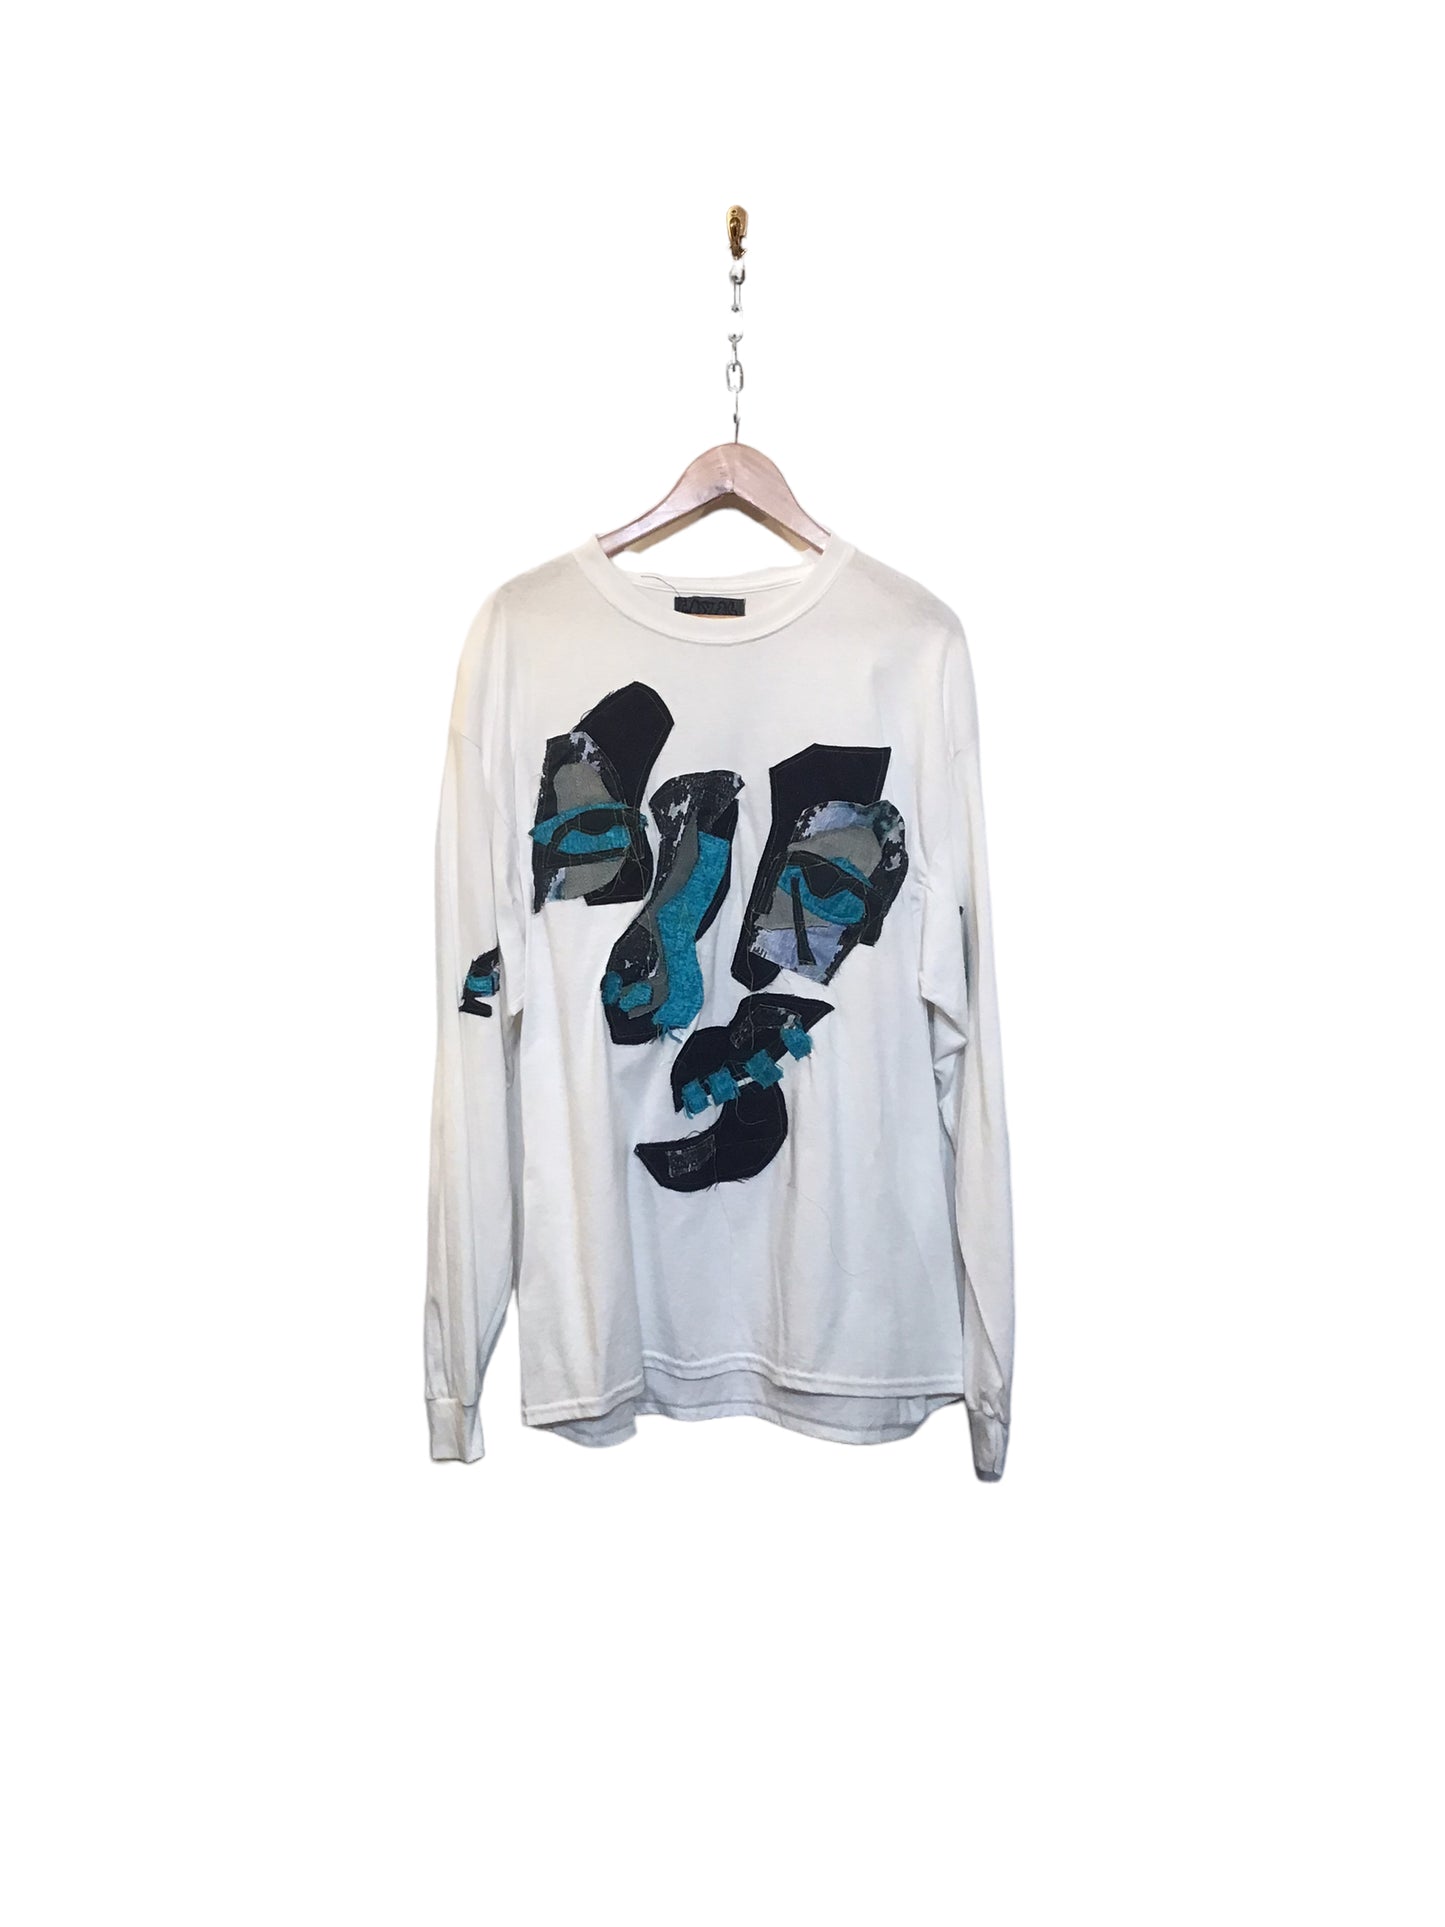 White Long Sleeved Top with Graphics (Size XXL)